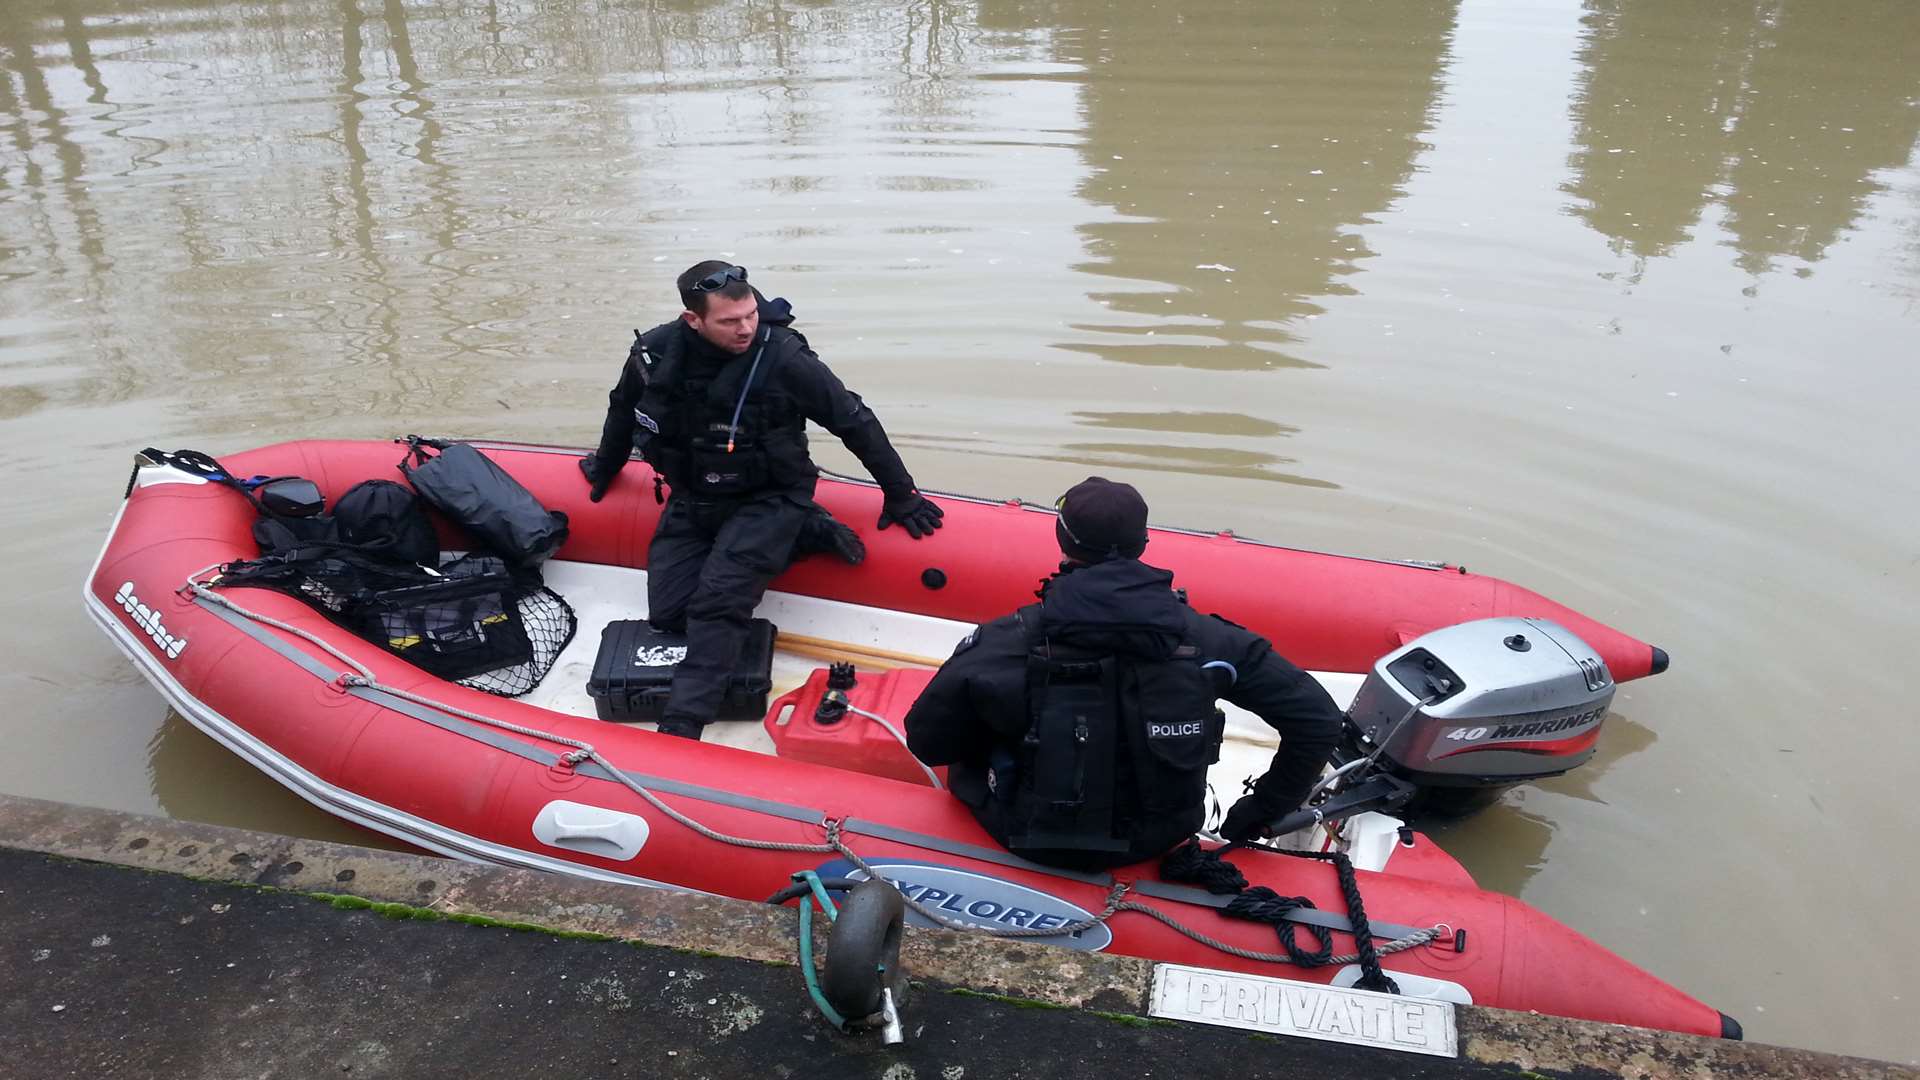 Officers from the police marine unit patrolling the river